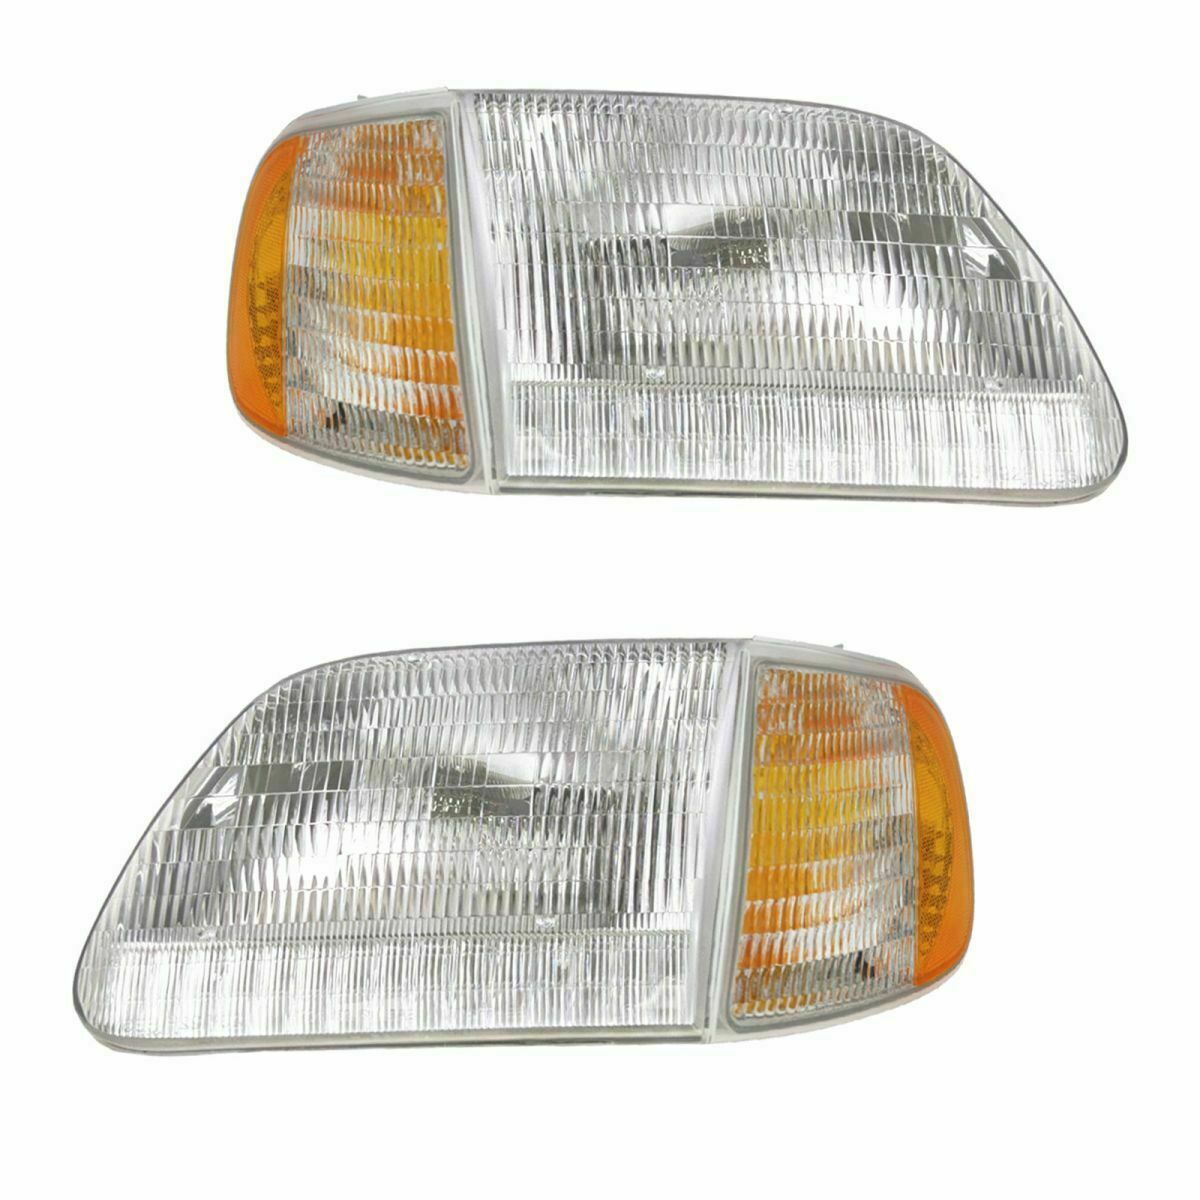 FIT FOR 1999 - 2003 FORD F-150 HEADLIGHTS & CORNER LIGHTS PAIR RIGHT AND LEFT